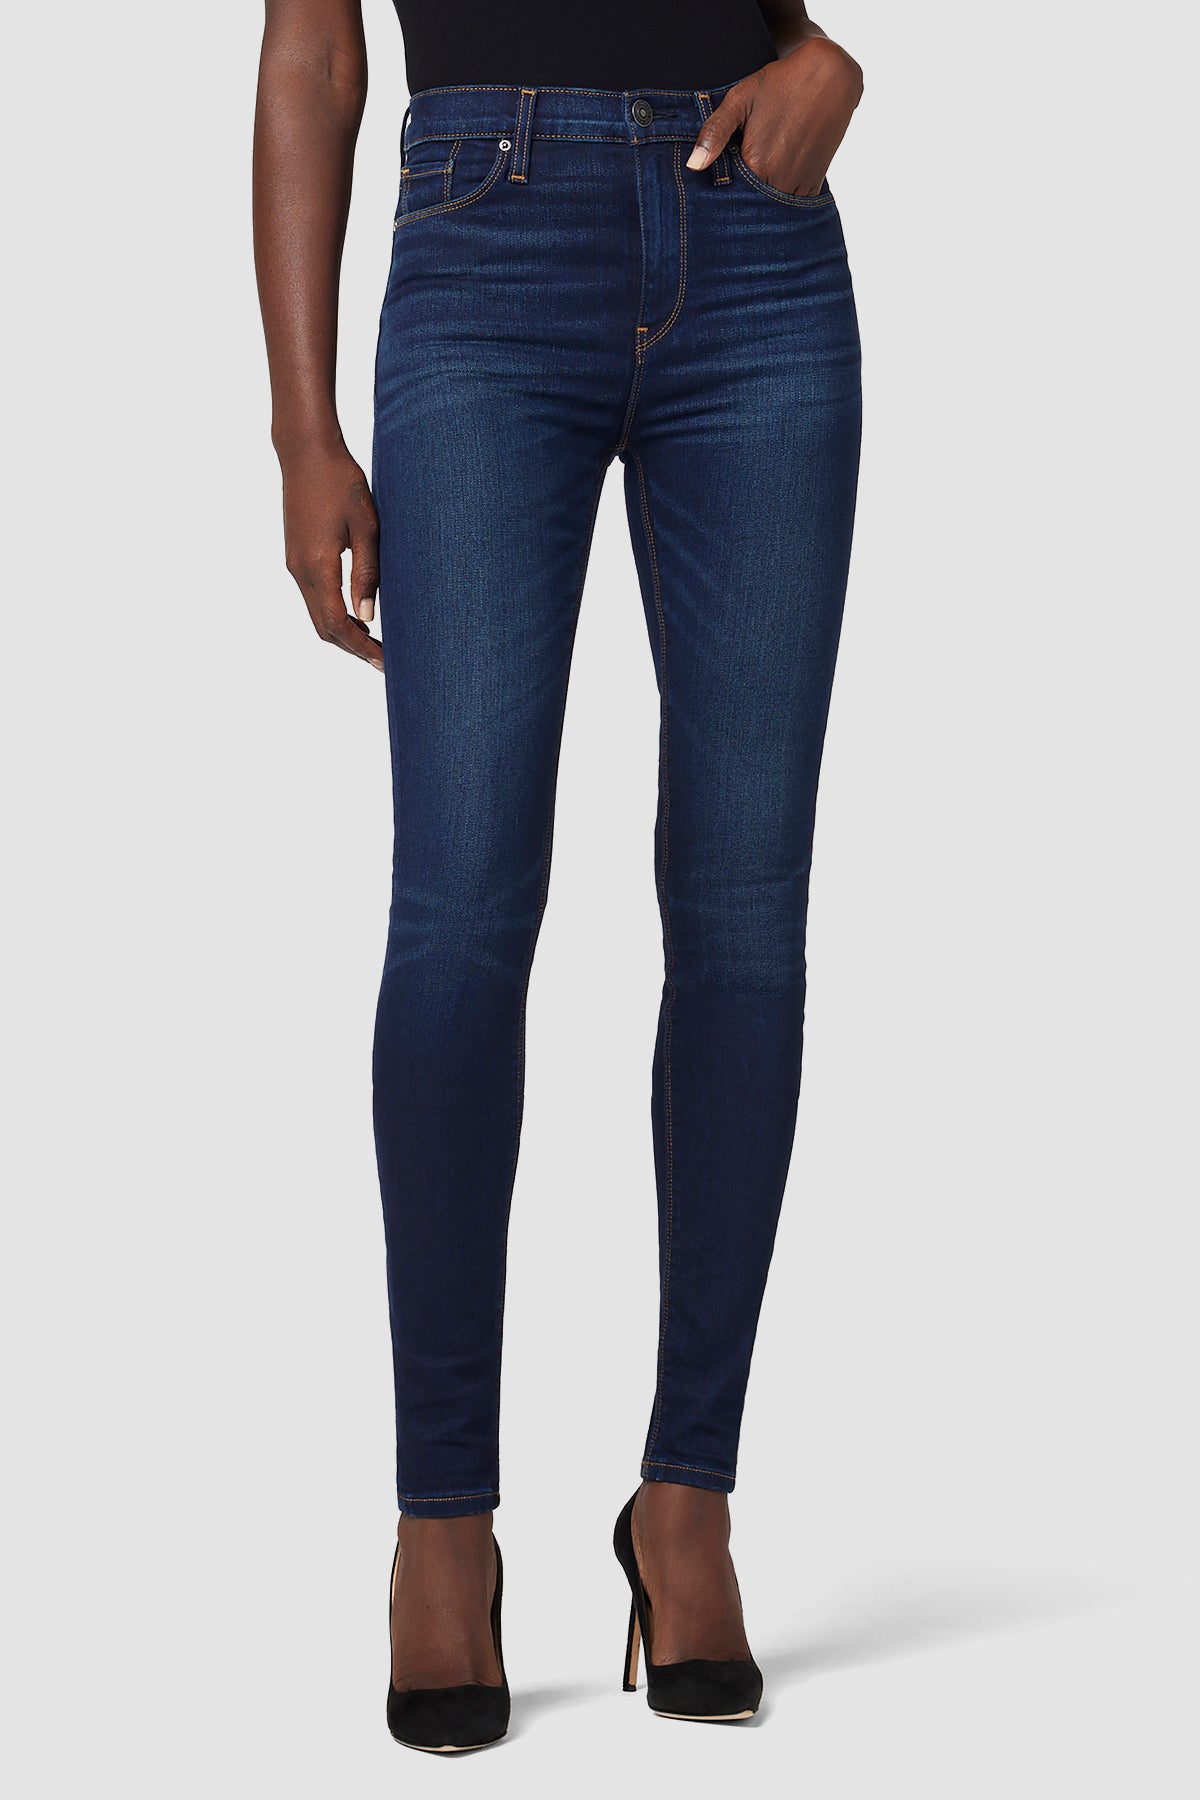 Light Blue Solid Full Length Casual Women Skinny Fit Jeans - Selling Fast  at Pantaloons.com